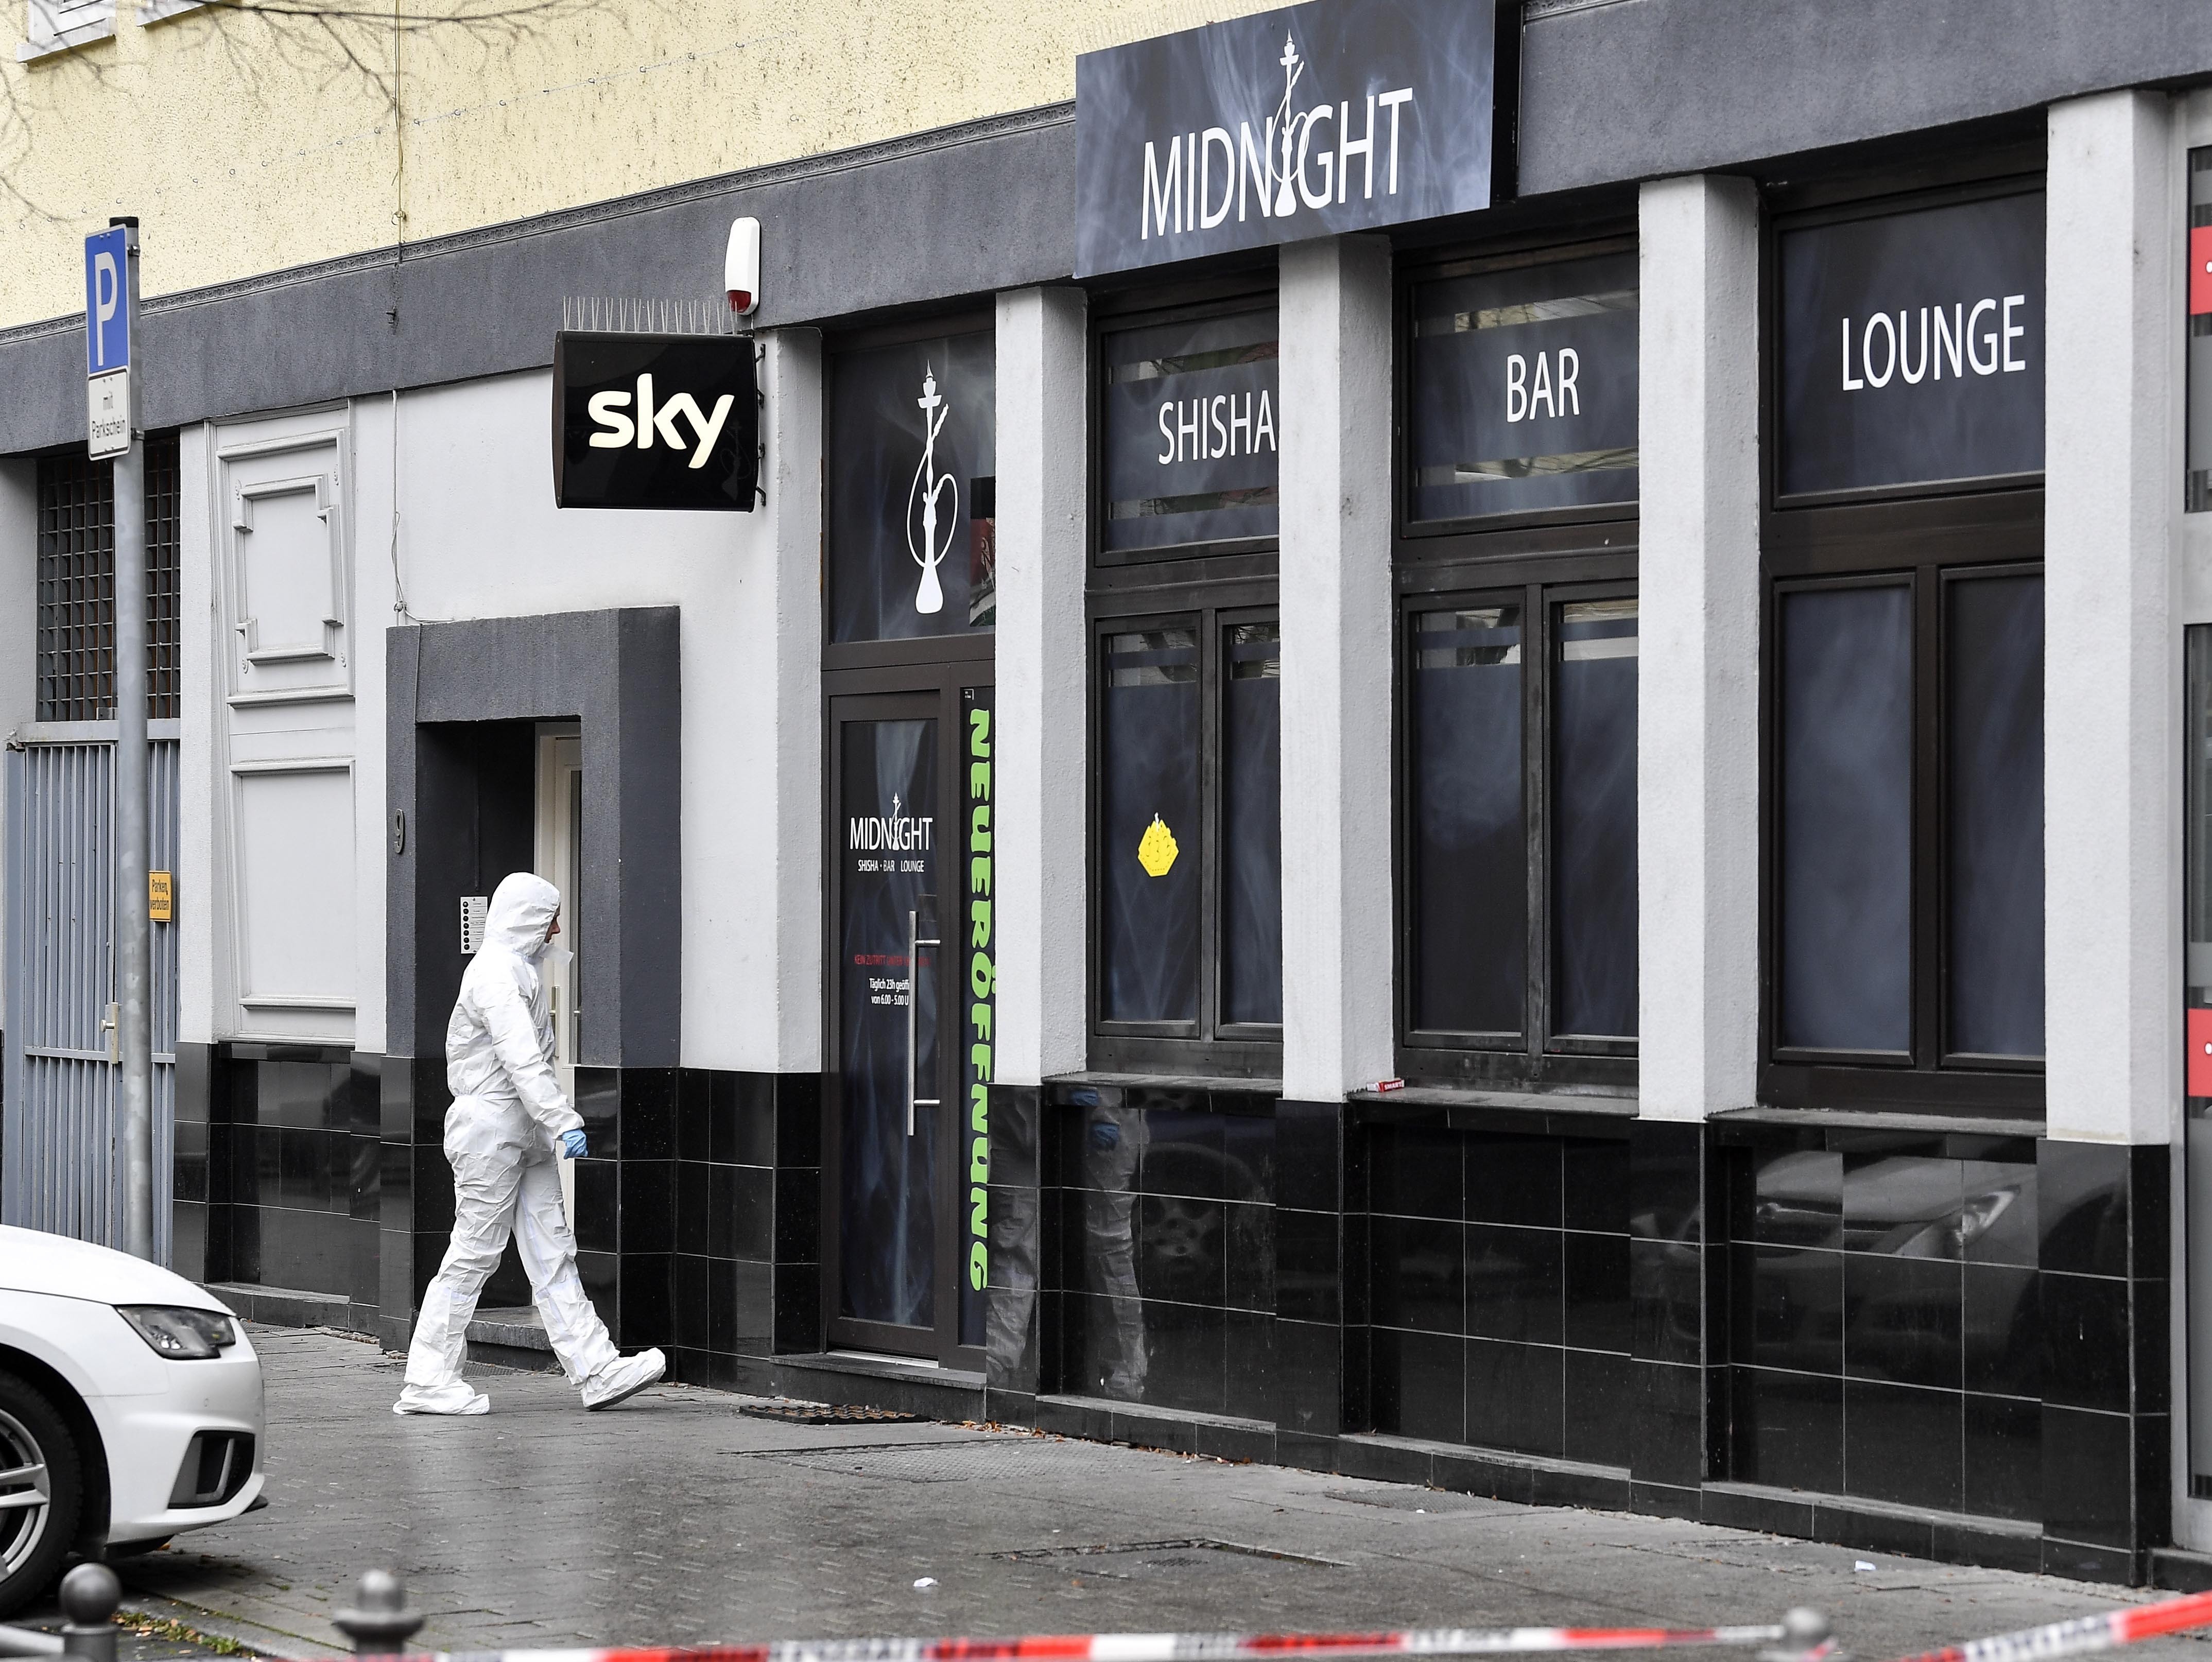  Police in hazmat suits secure the bar targeted in the attack